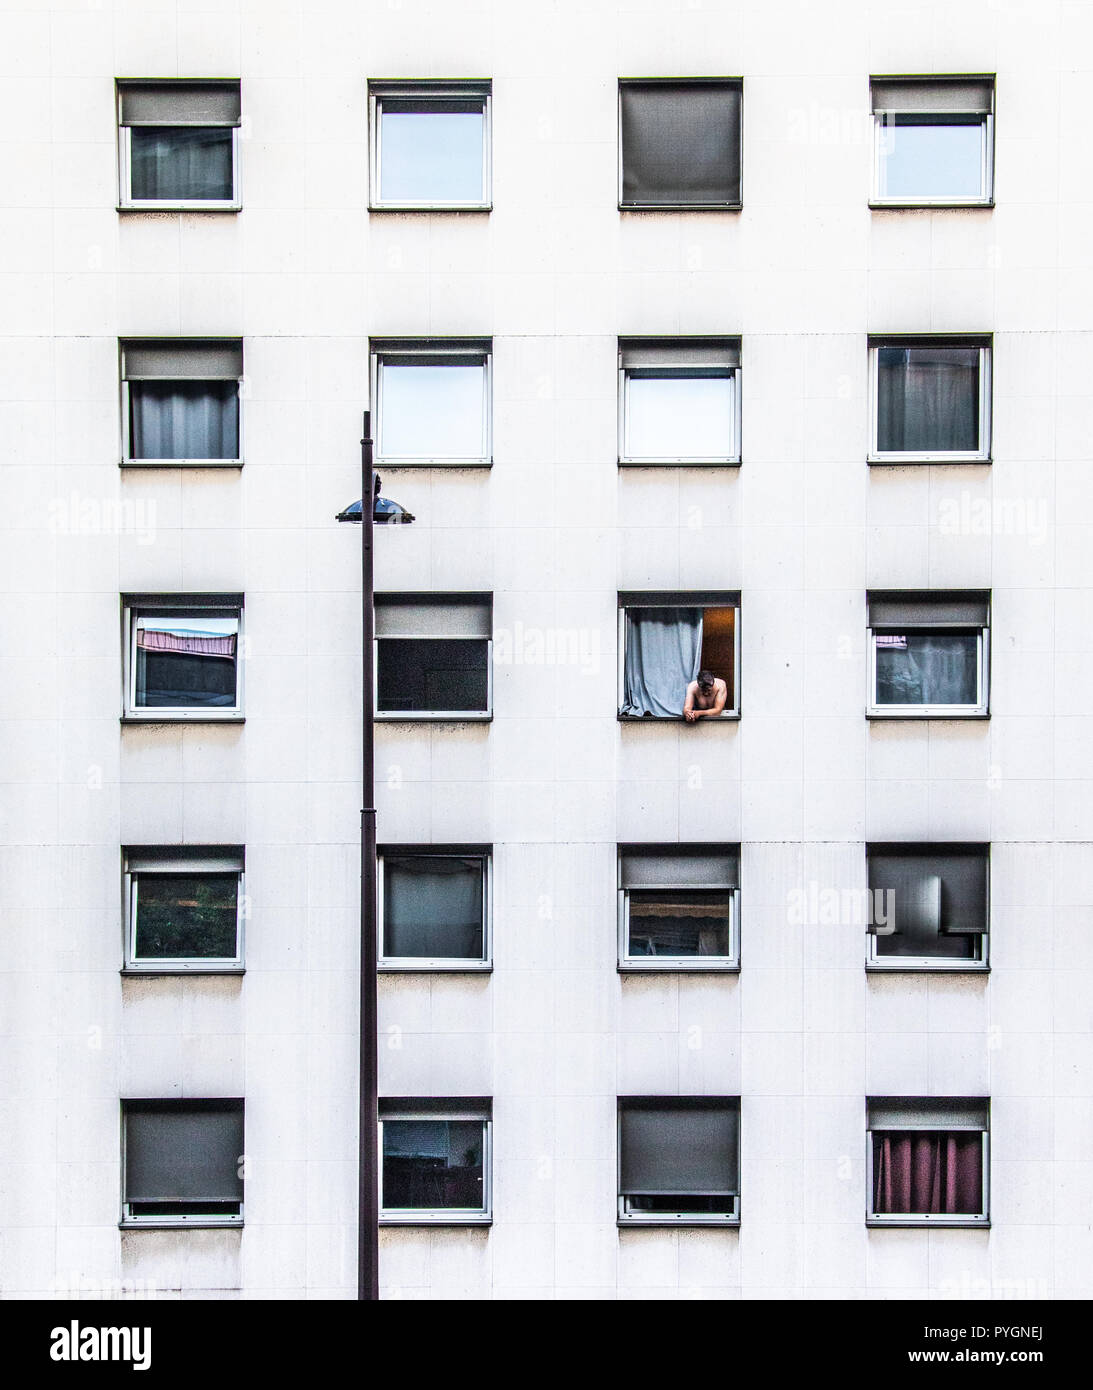 Man in the window of an apartment building, Paris, France Stock Photo